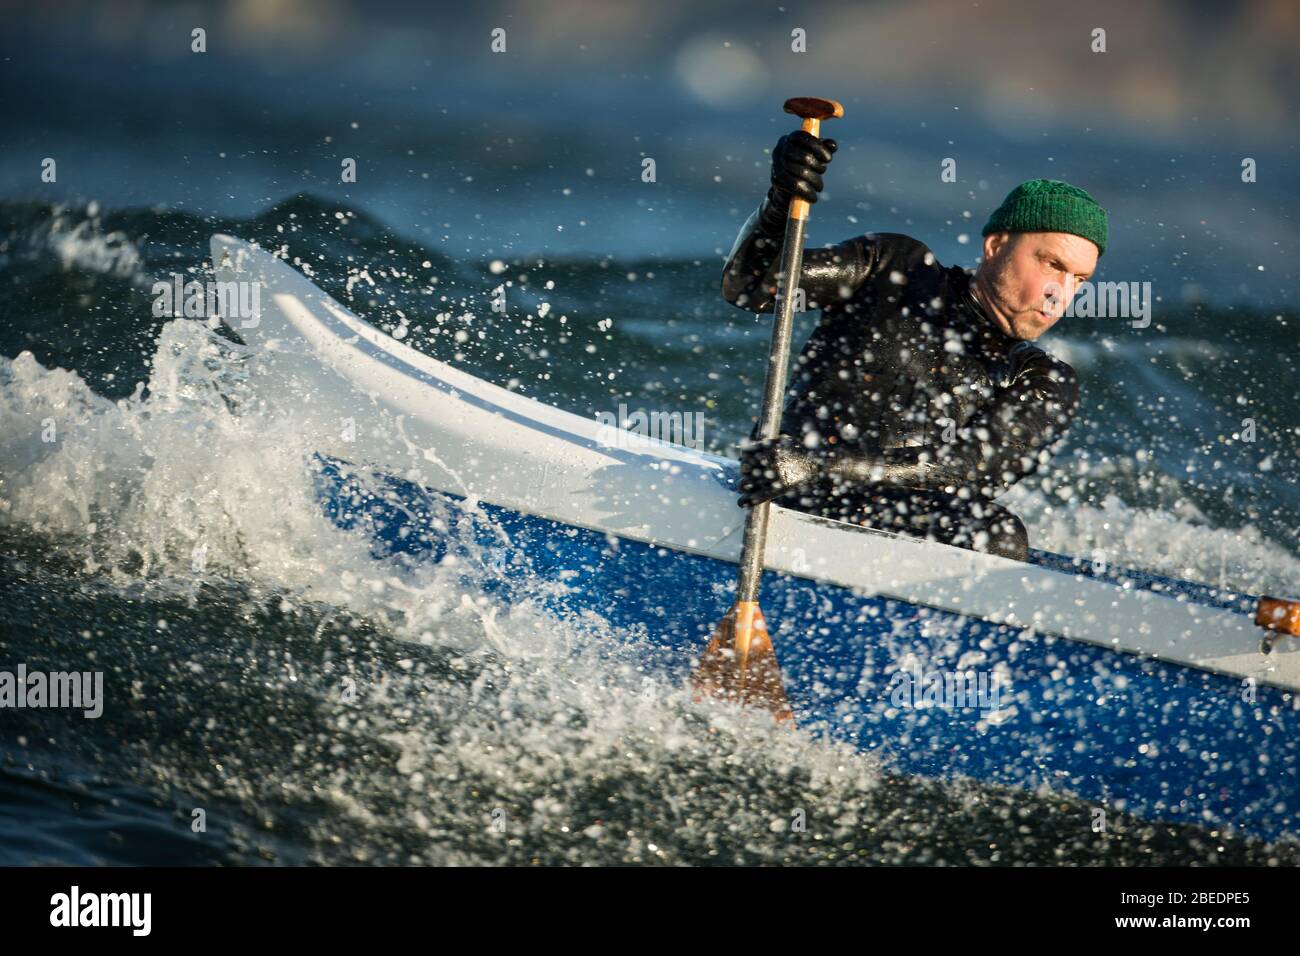 One man in an outrigger canoe in choppy ocean waves Stock Photo